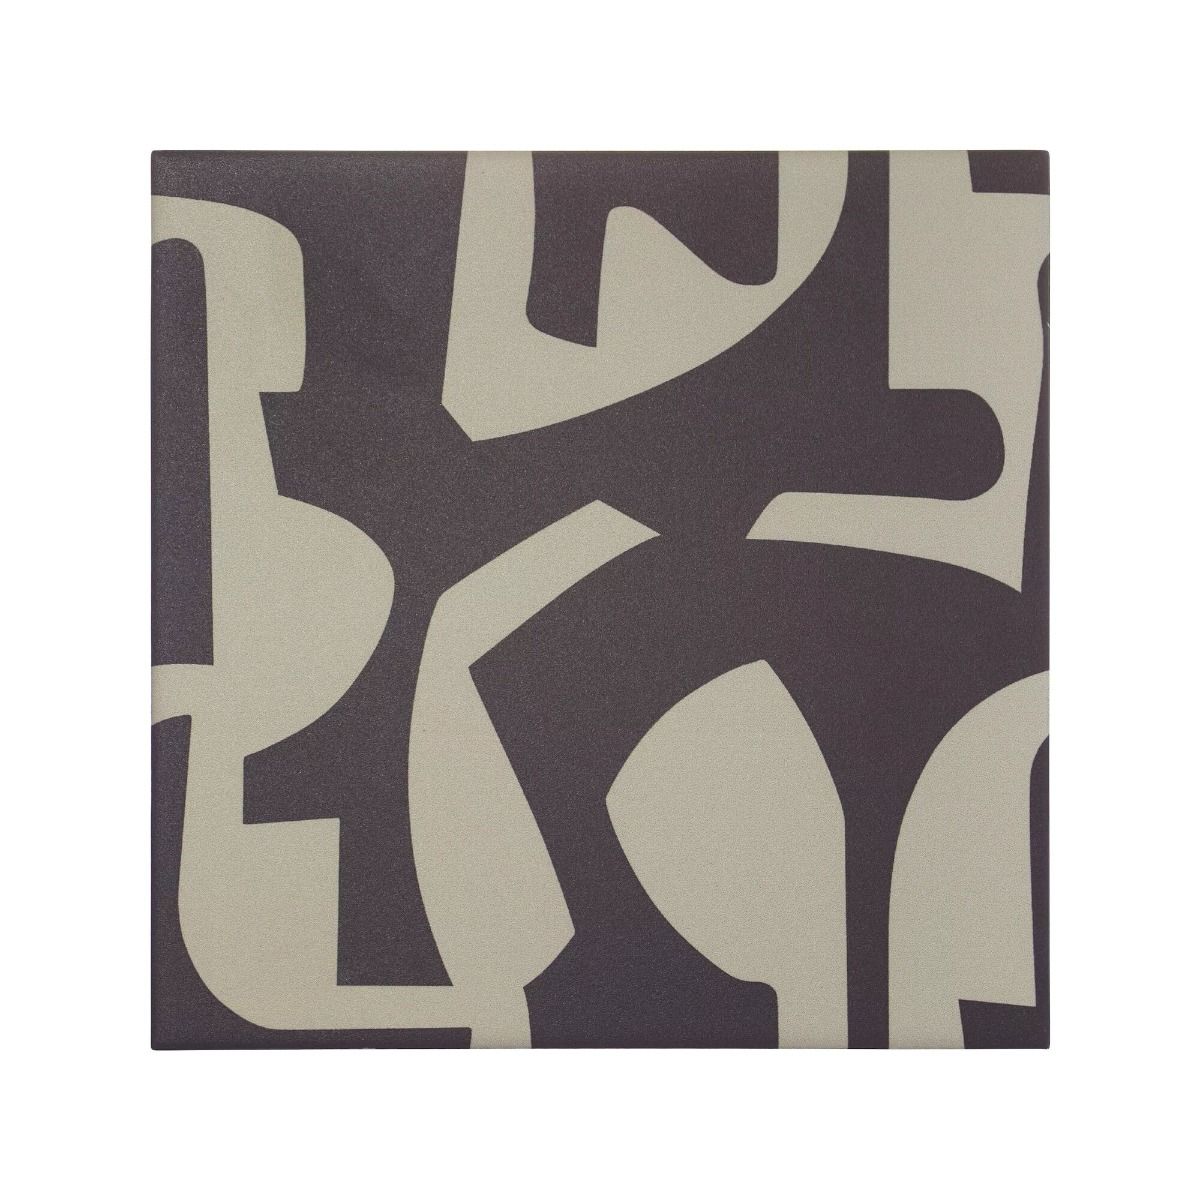 Kelly Hoppen Puzzle Beige and Black